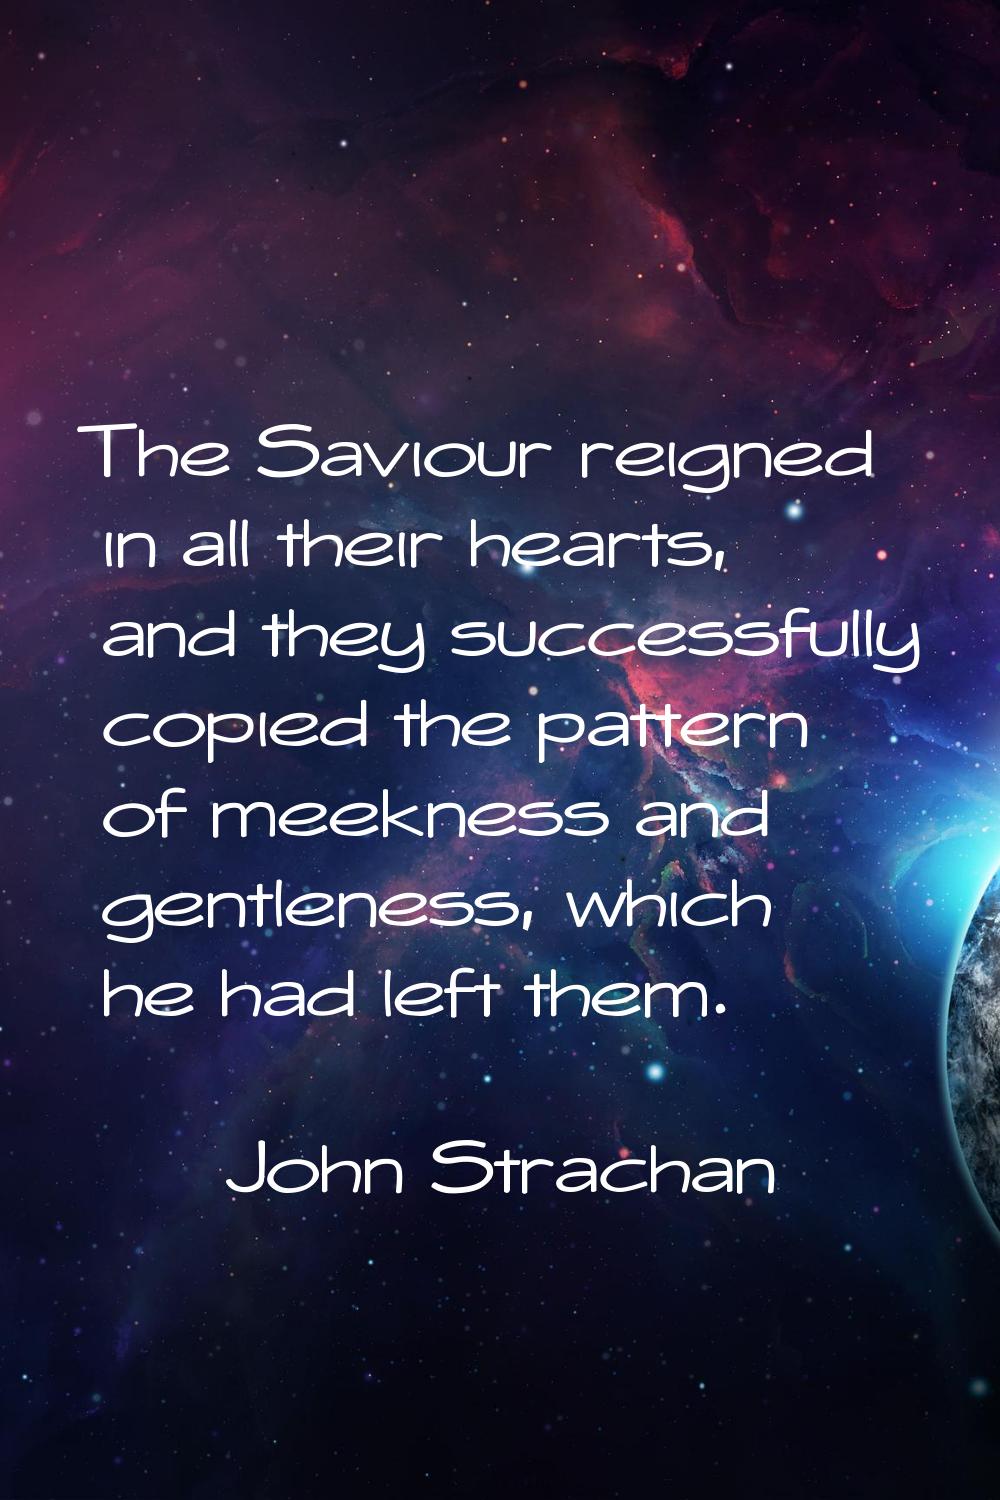 The Saviour reigned in all their hearts, and they successfully copied the pattern of meekness and g